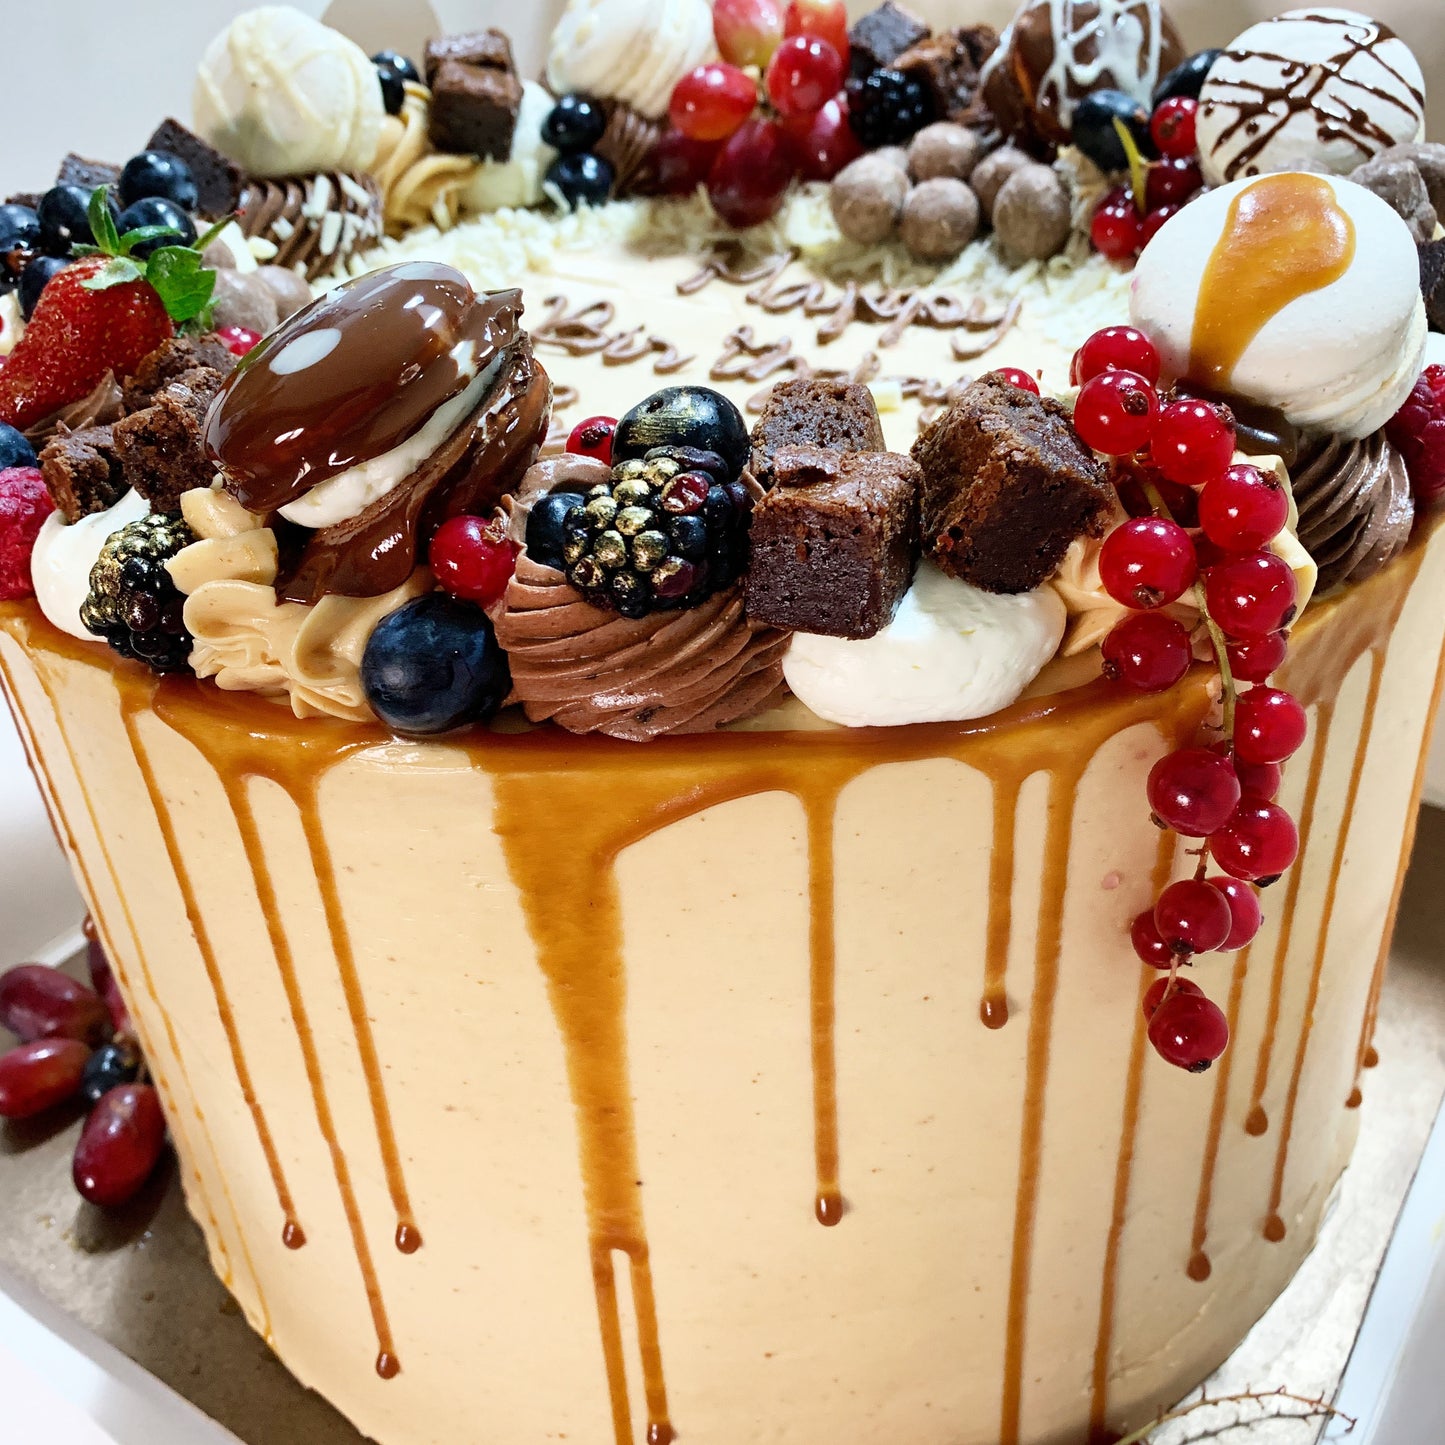 “How do you want it?”: Build Your Own Standard Layer Cake